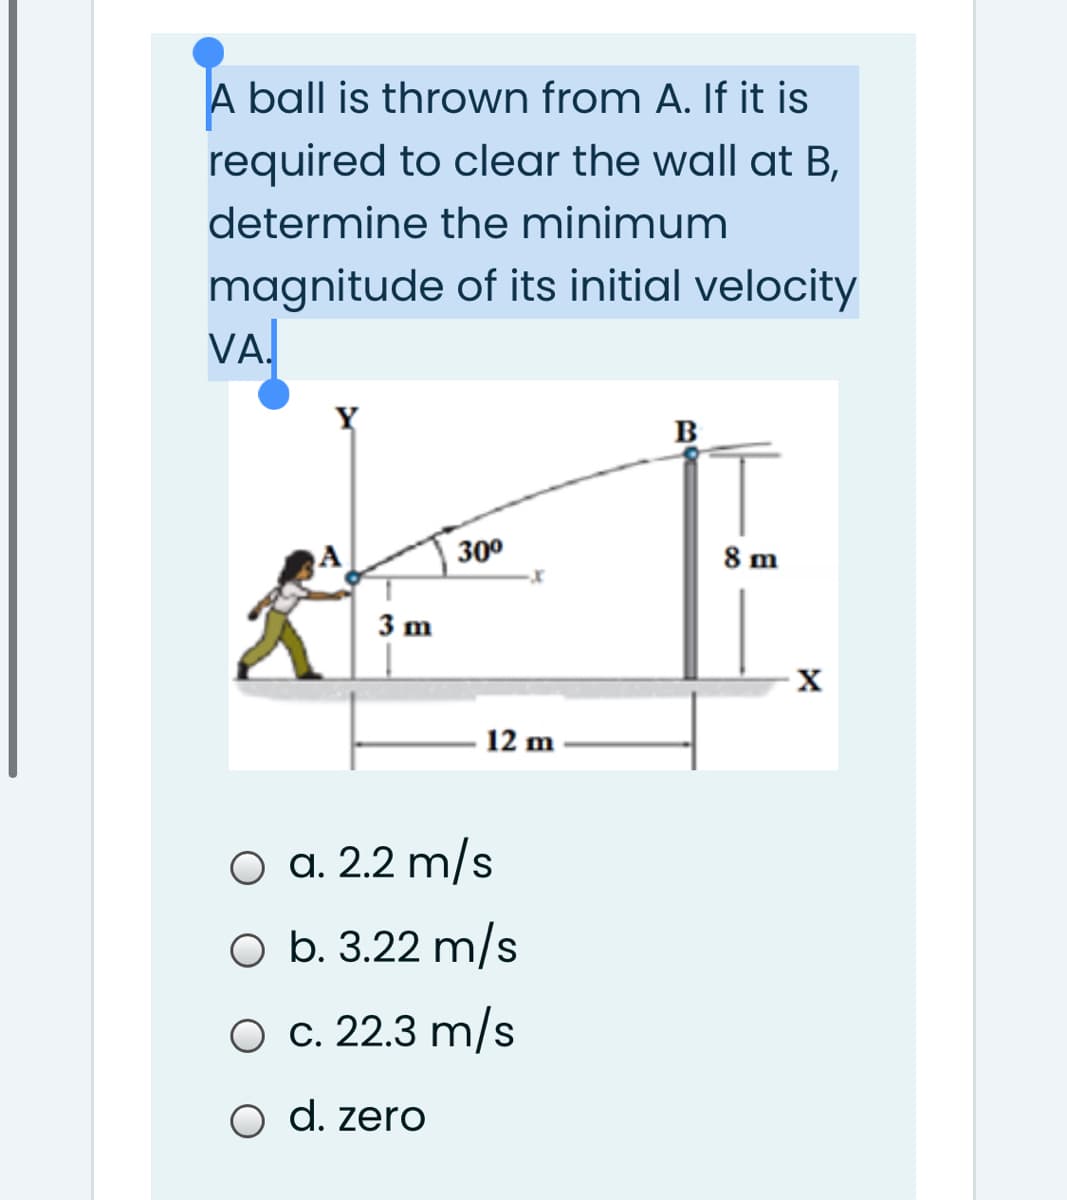 A ball is thrown from A. f it is
required to clear the wall at B,
determine the minimum
magnitude of its initial velocity
VA.
B
A
30°
8 m
3 m
12 m
O a. 2.2 m/s
O b. 3.22 m/s
O c. 22.3 m/s
O d. zero
